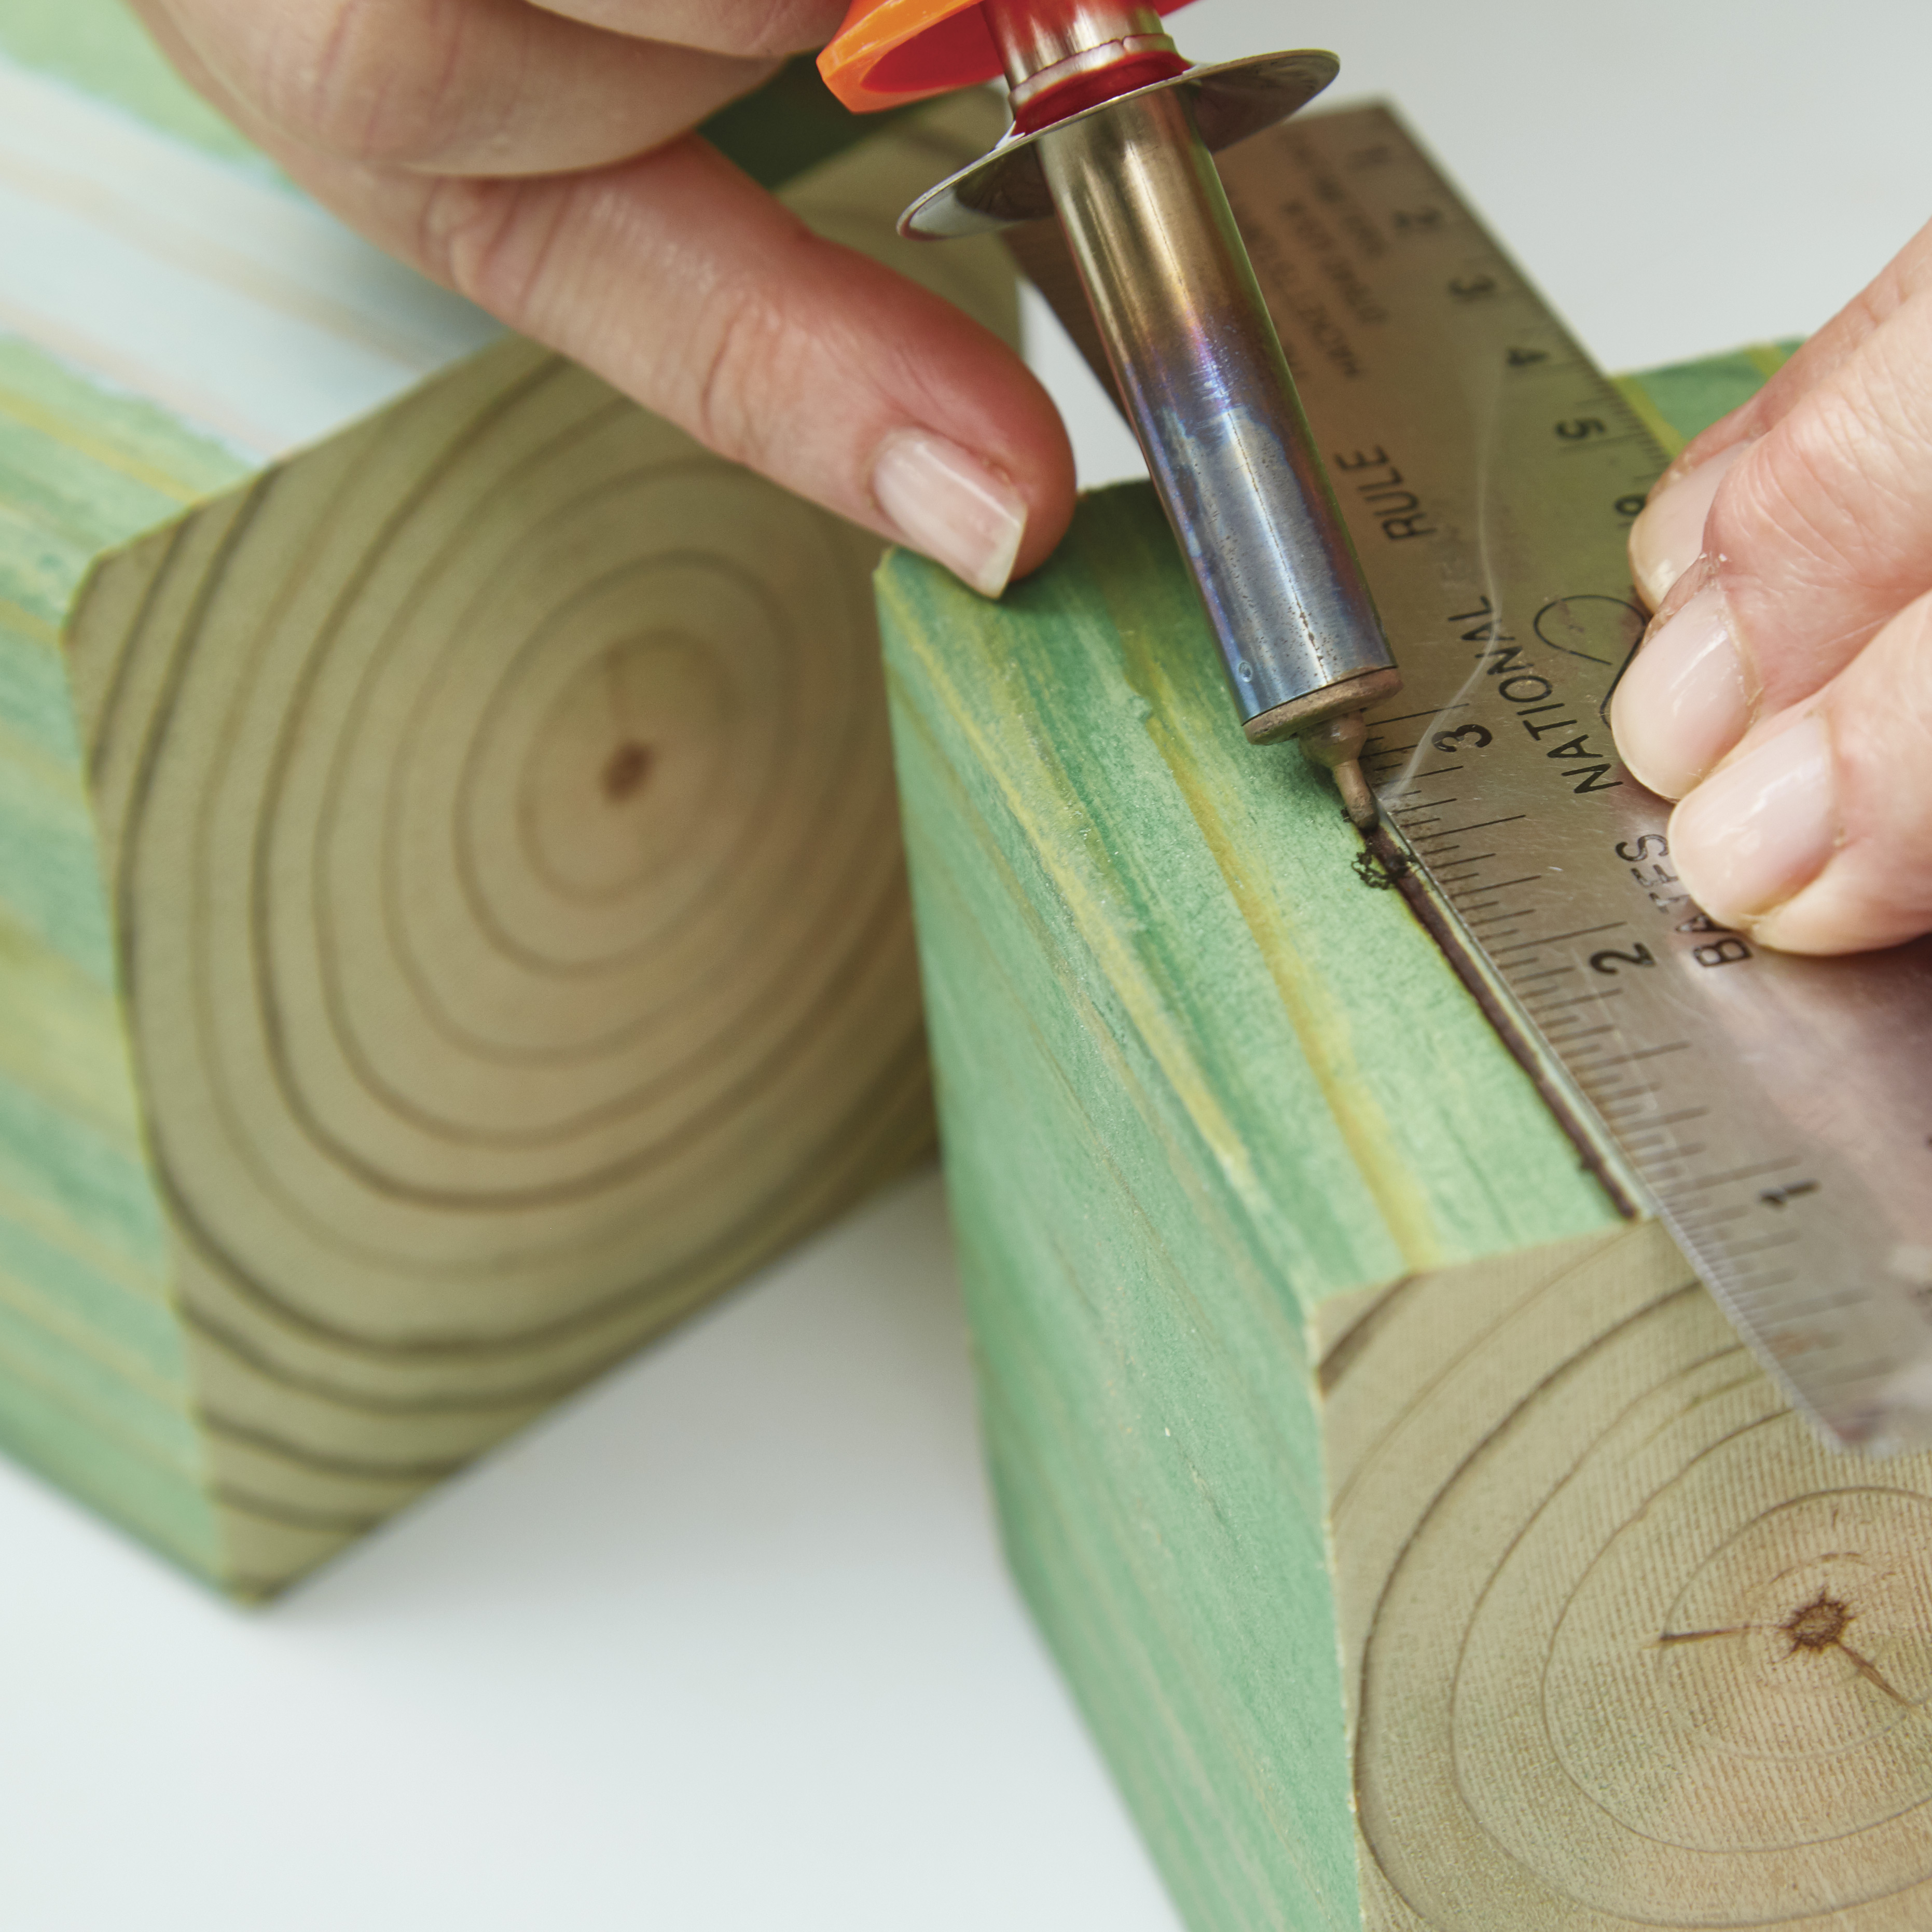 diy-garden-poles-woodburn: Resting your hand on a second block gives added control while using the wood-burning tool.